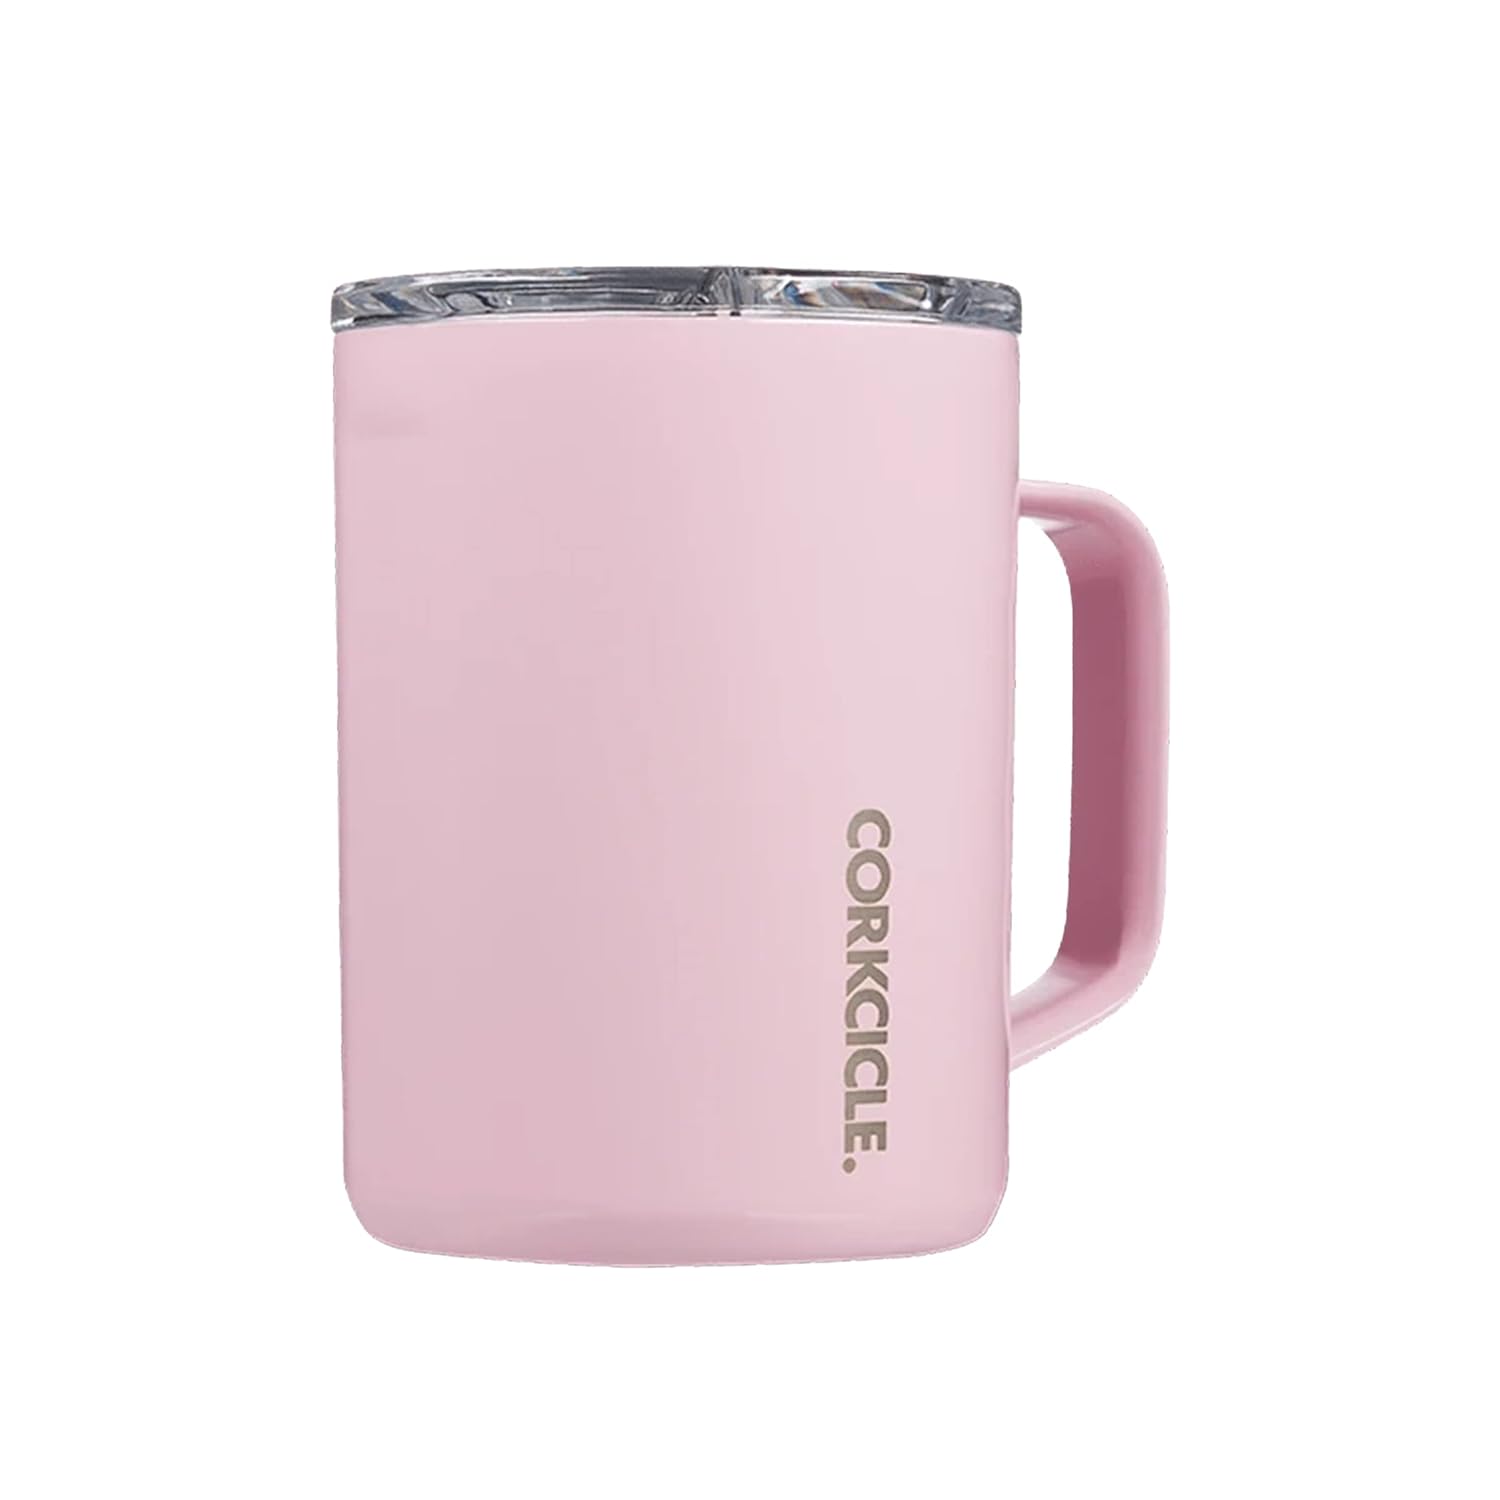 Corkcicle Coffee Mug, Insulated Travel Coffee Cup with Lid, Stainless Steel, Spill Proof for Coffee, Tea, and Hot Cocoa, Rose Quartz 16 oz